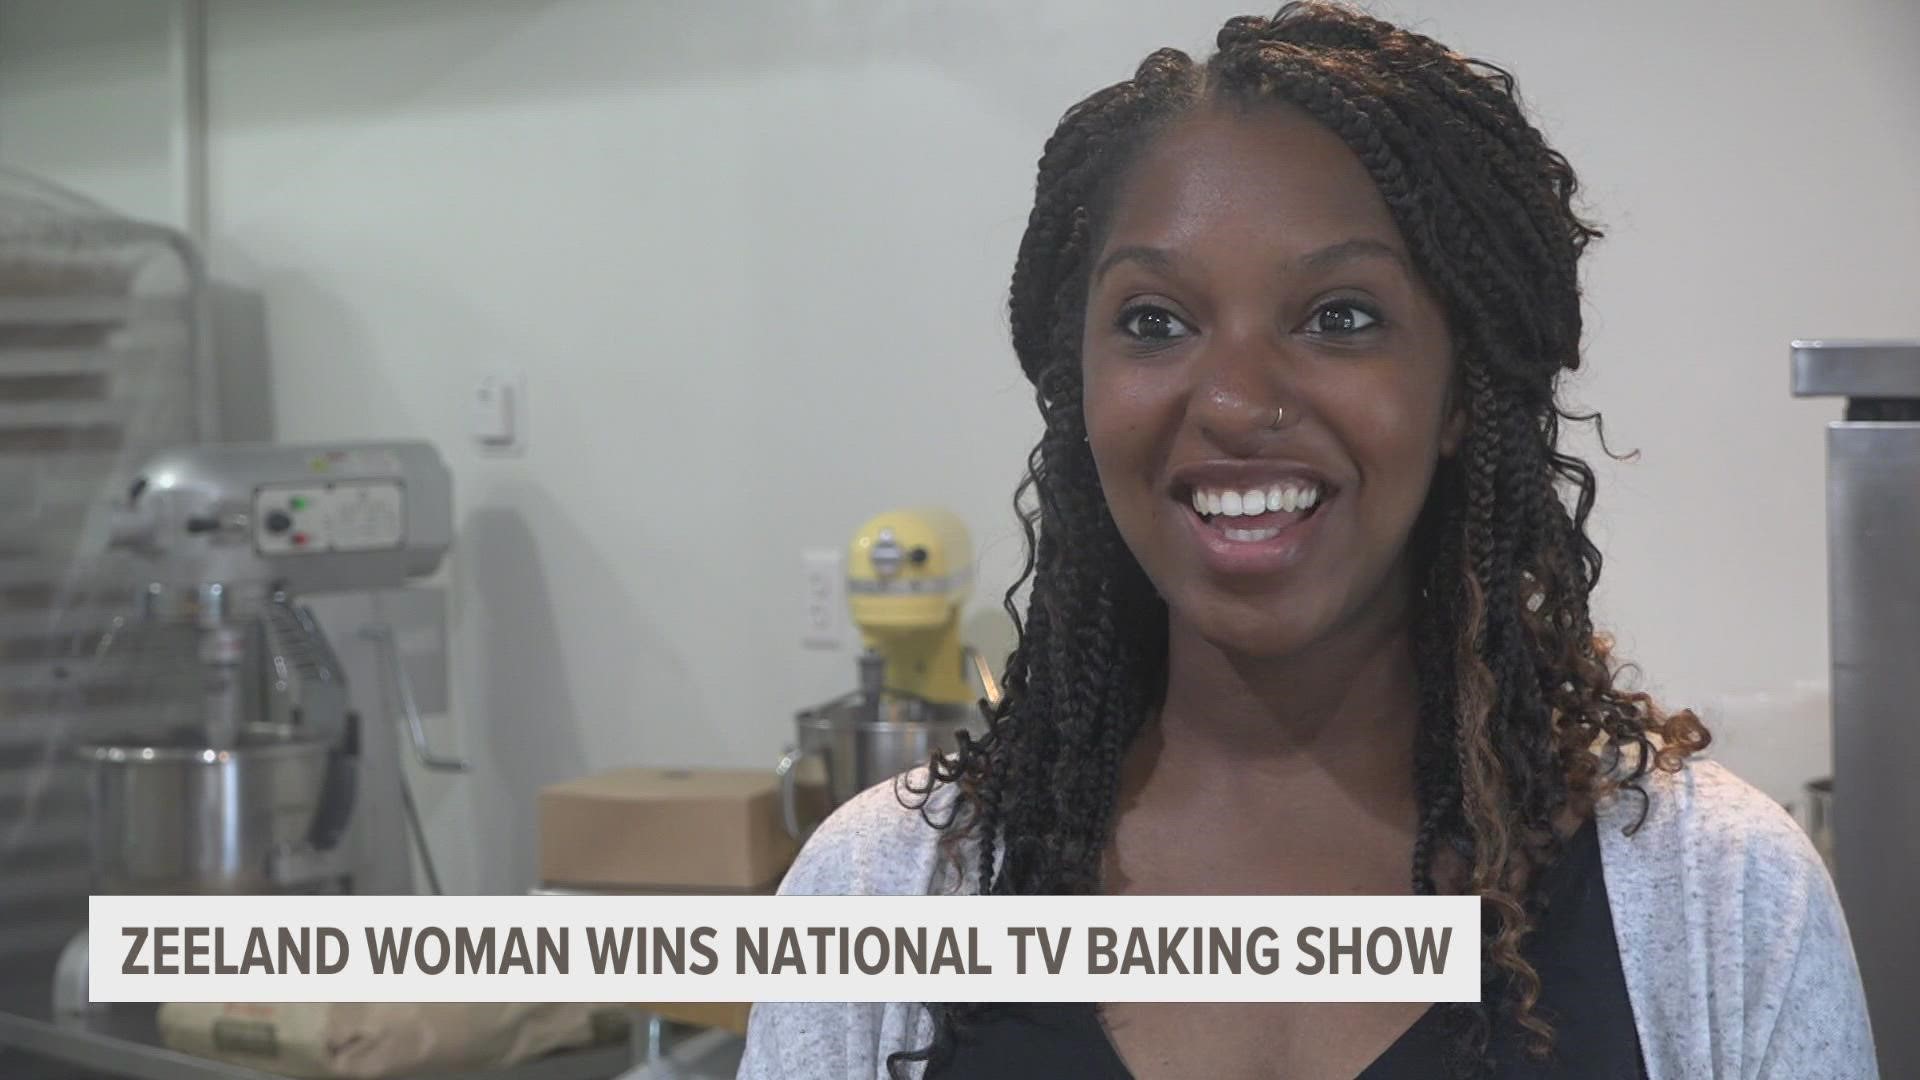 She competed against five other home bakers from around the country for a cash prize and the chance to have their baked treat featured at the Silos Bakery in Waco.